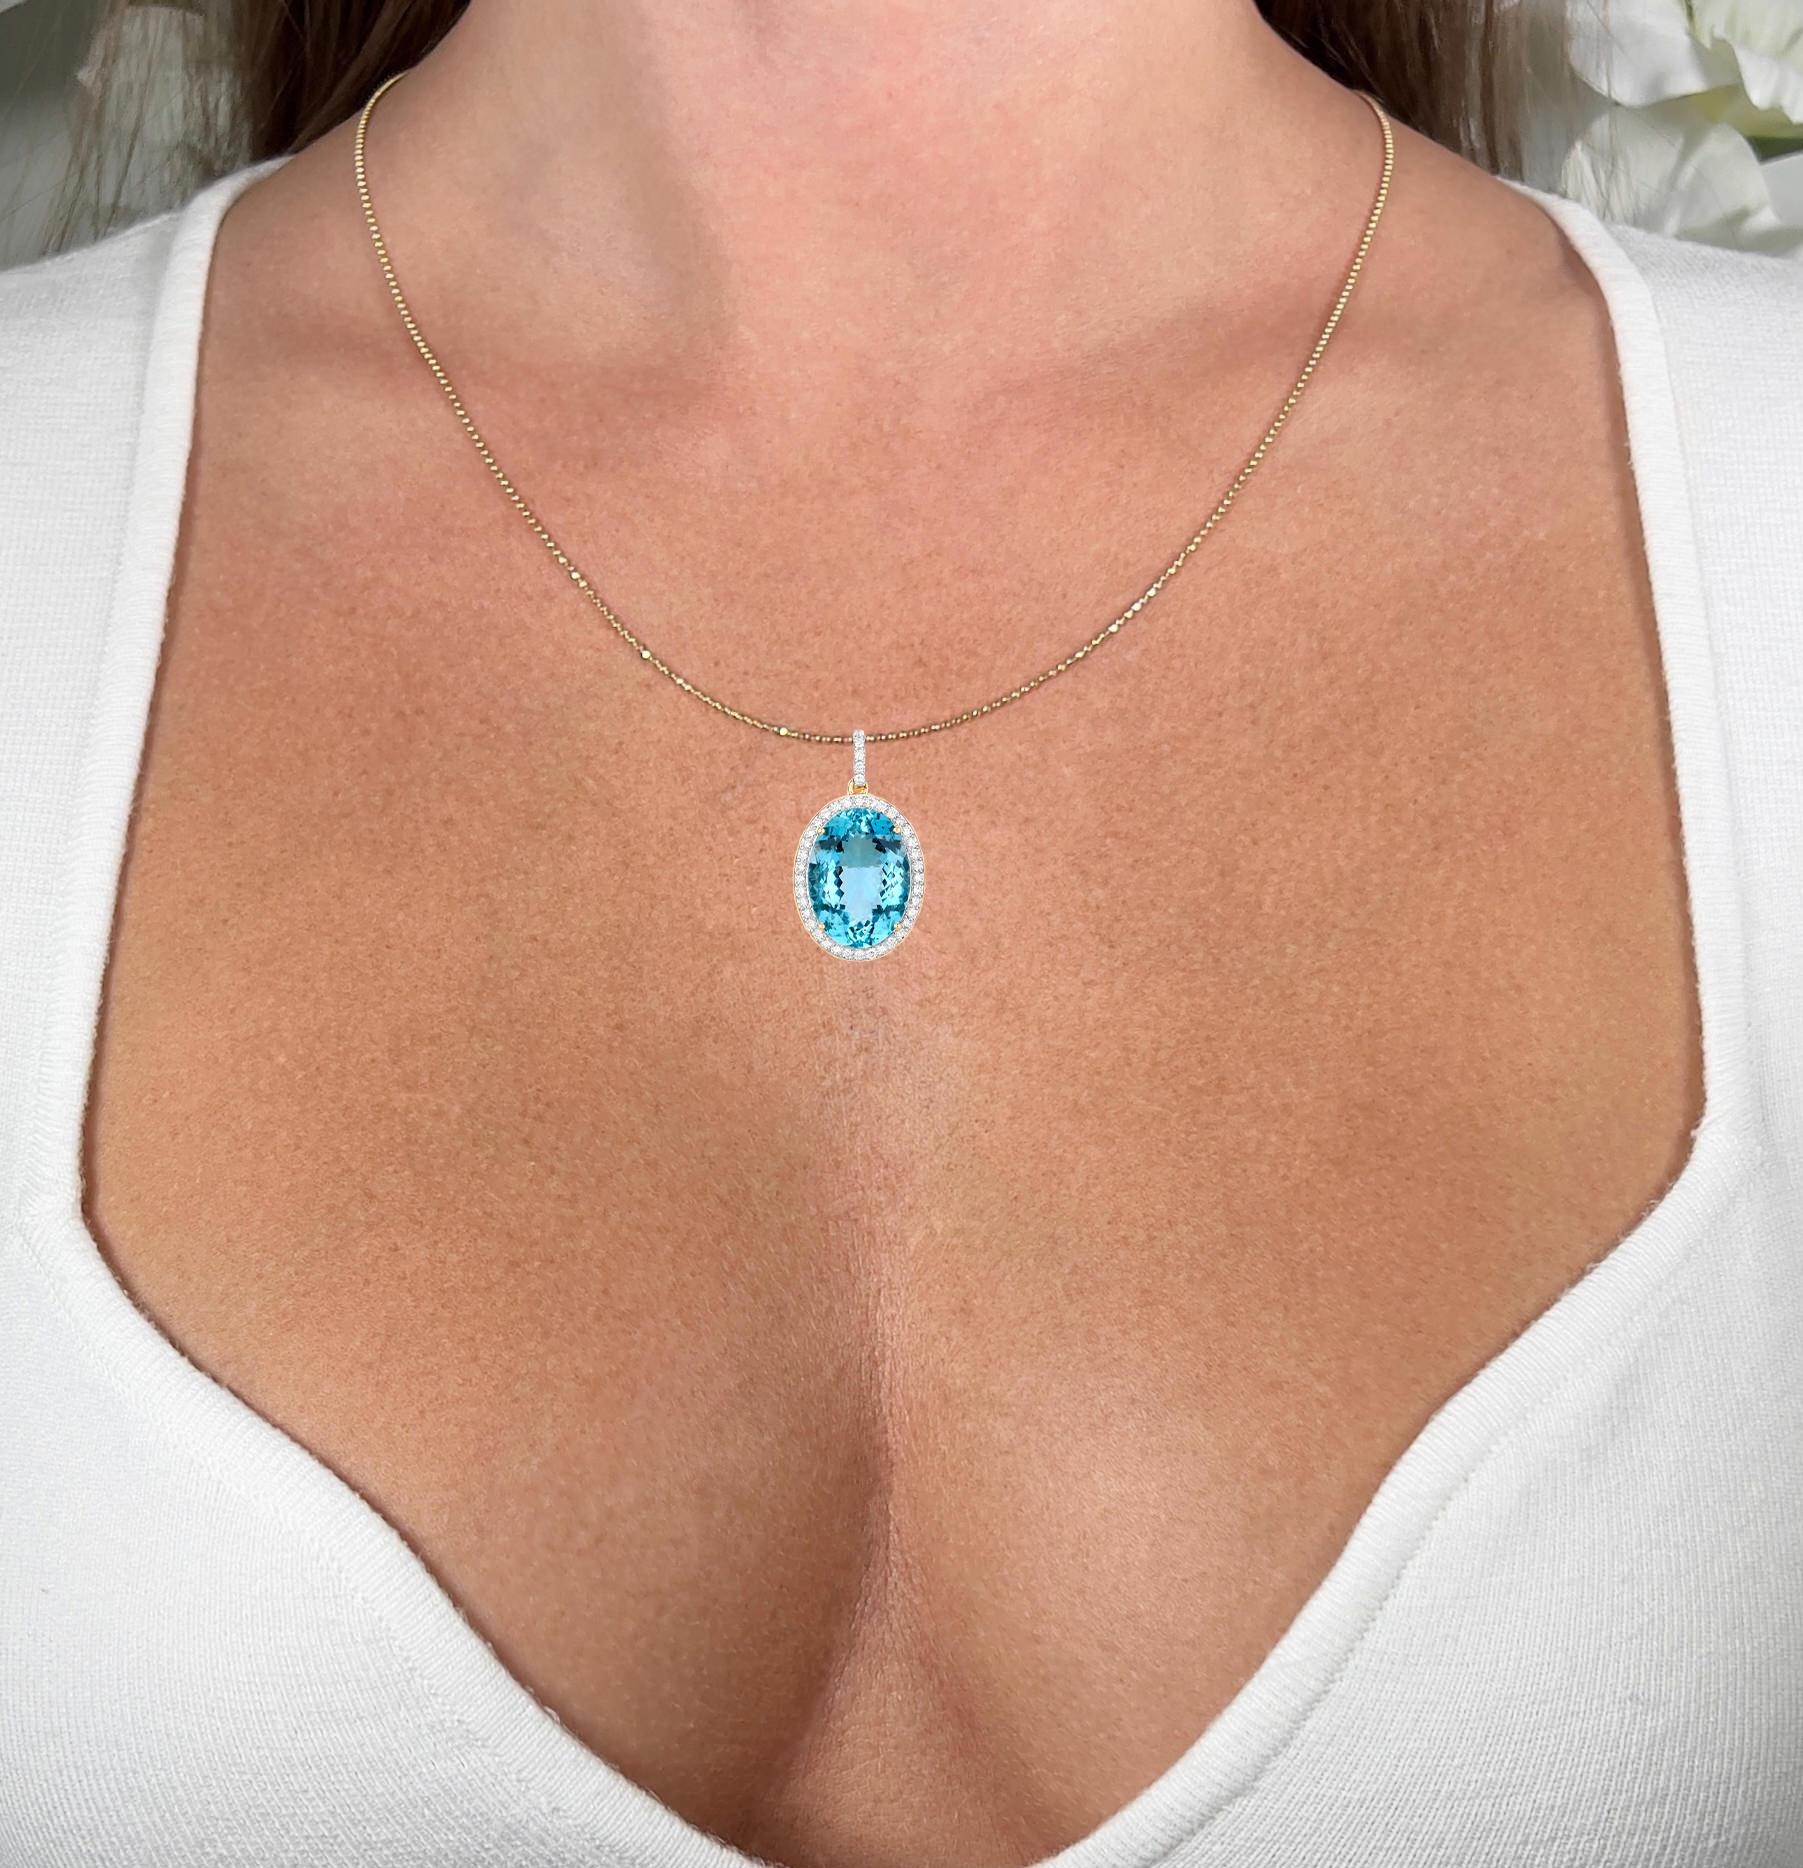 It comes with the Gemological Appraisal by GIA GG/AJP
All Gemstones are Natural
Aquamarine = 13.05 Carat
41 Diamonds = 0.57 Carats
Metal: 14K Yellow Gold
Pendant Dimensions: 32 x 18 mm